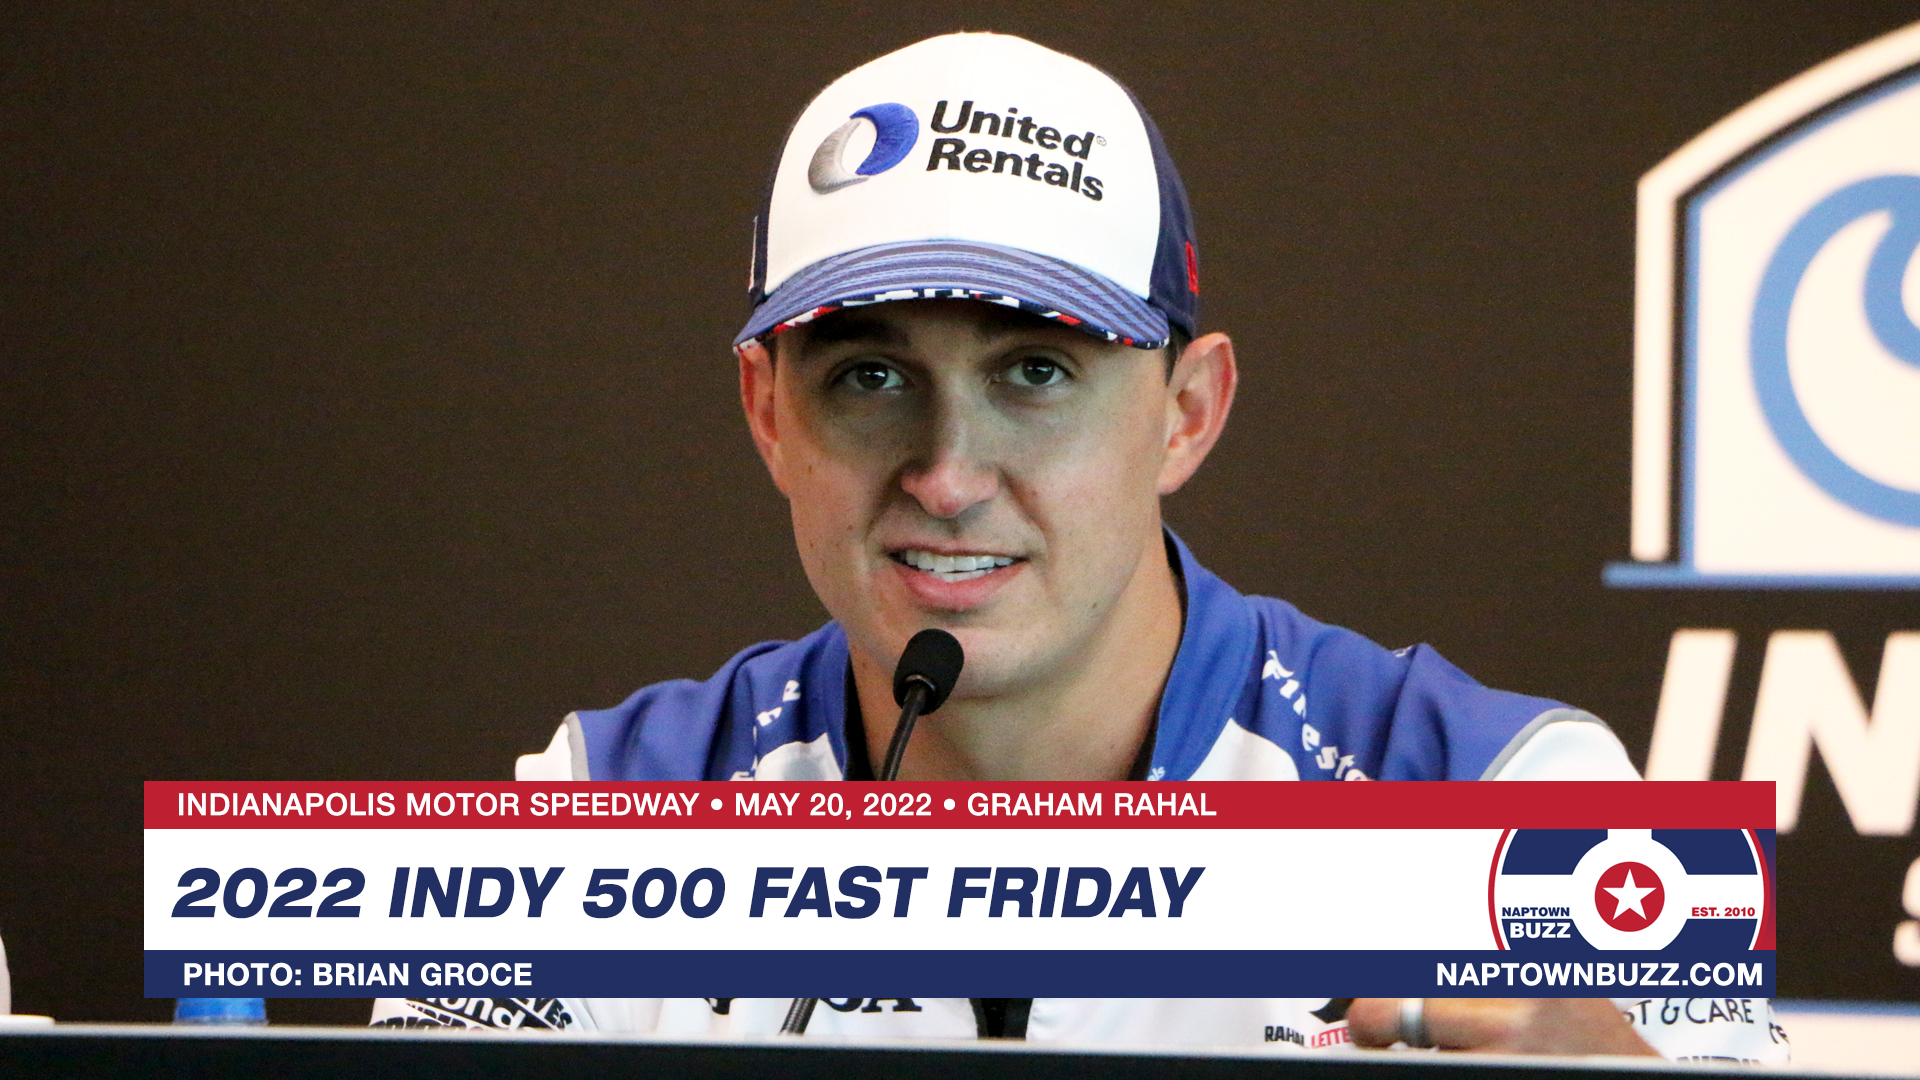 Graham Rahal on Indy 500 Fast Friday Practice at Indianapolis Motor Speedway on May 20, 2022